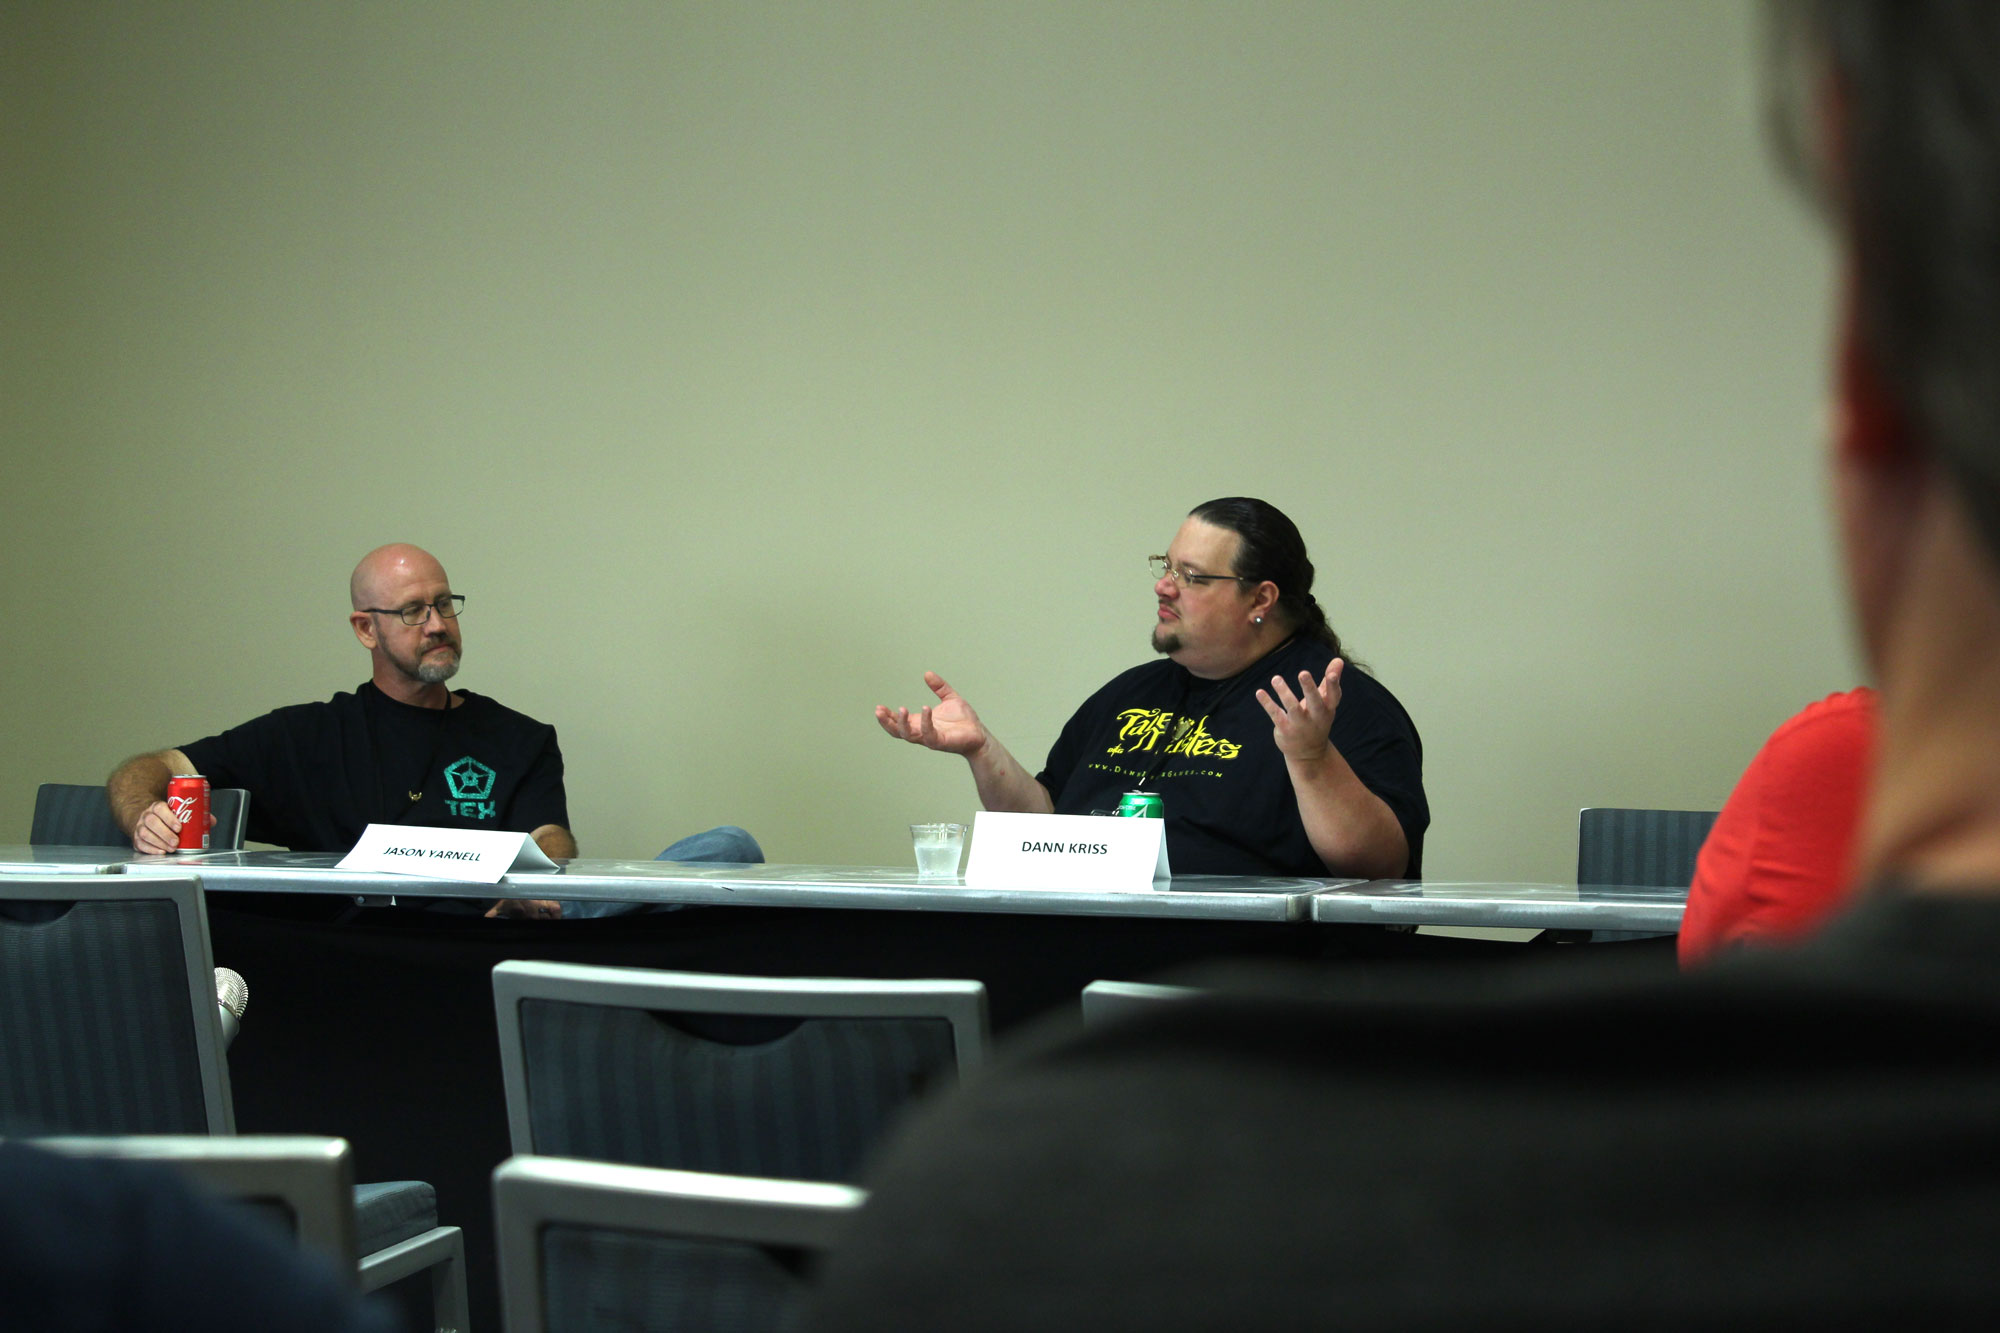 PHOTO: Jason Yarnell and Dann Kriss in a panel setting discuss game ideas and how they may not always be fun to play at the GTEX Expo. Photo by The Signal Audience Engagement Coordinator Arturo Guerra.